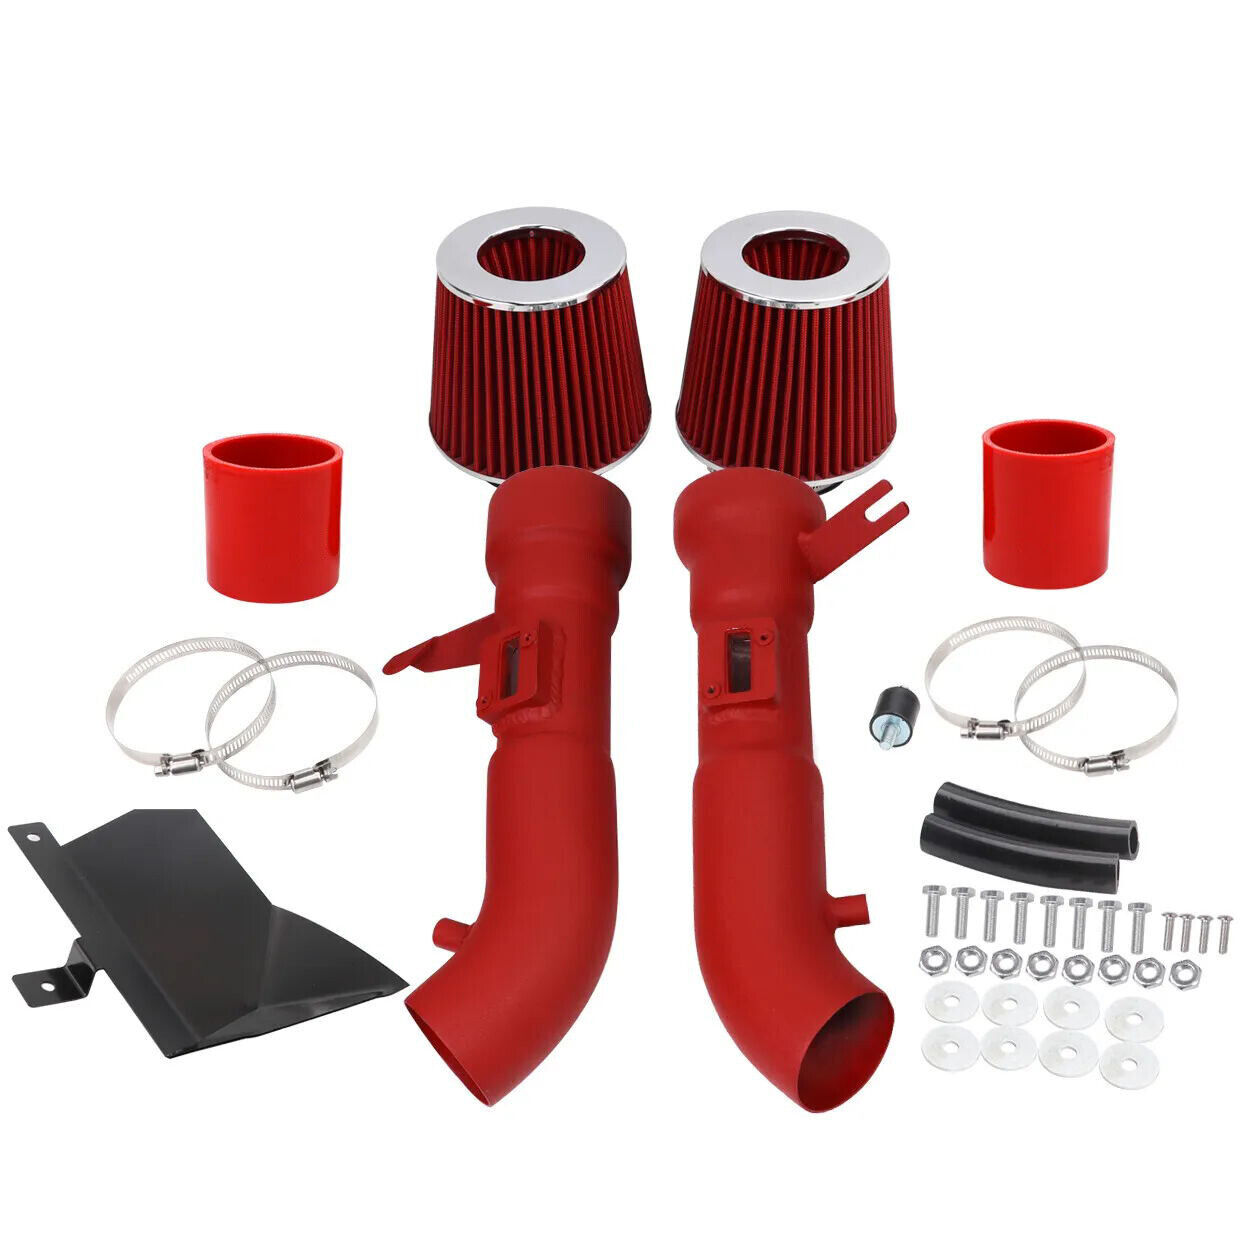 Cold Air Intake System Fits For Nissan 370Z with 3.7L V6 Engine Infiniti G37 Red